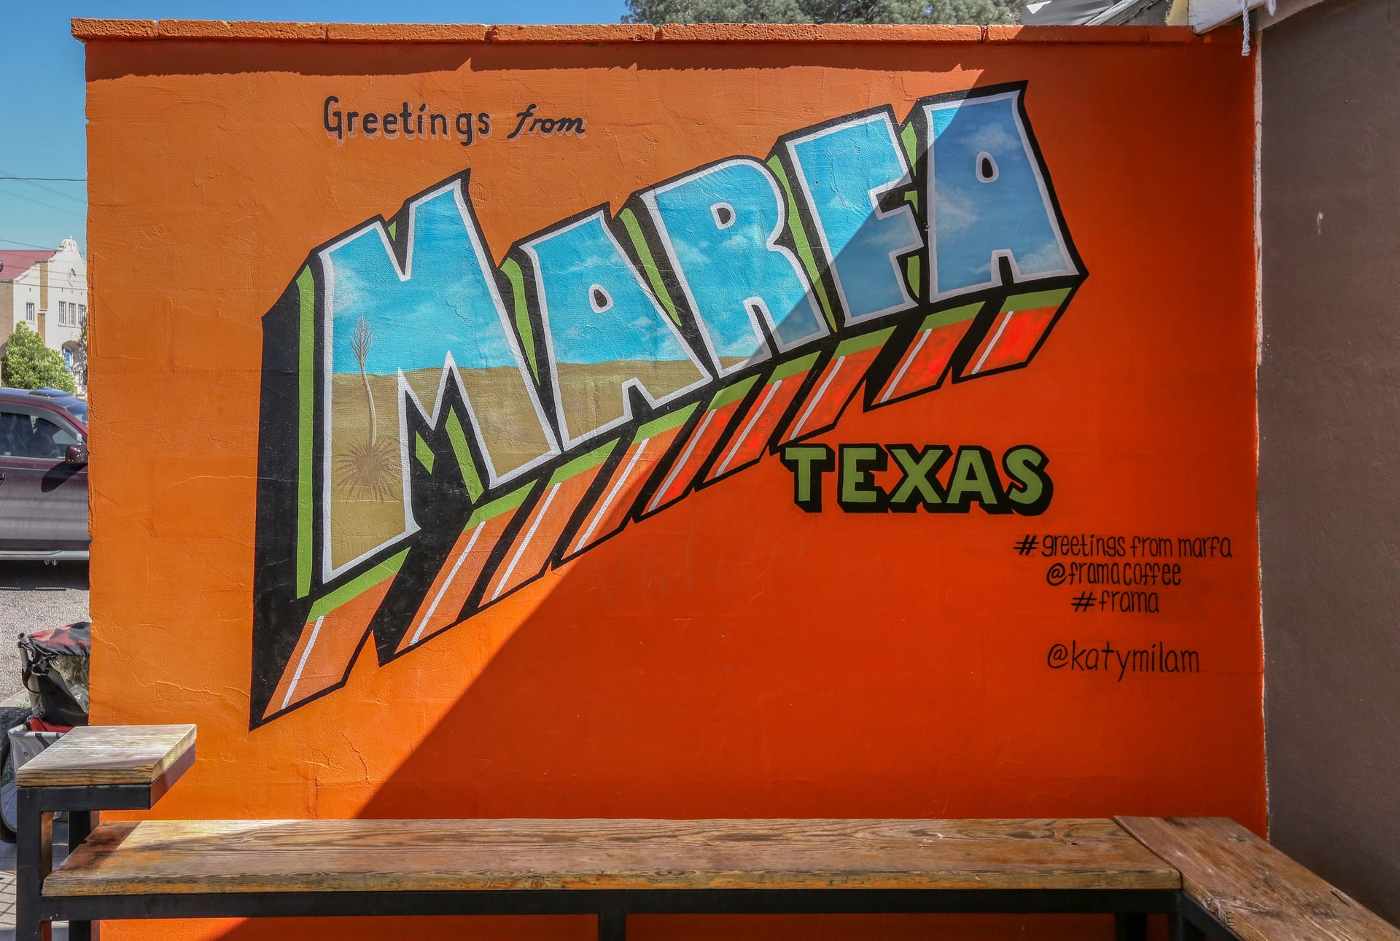 greetings from marfa sign - marfa to big bend national park